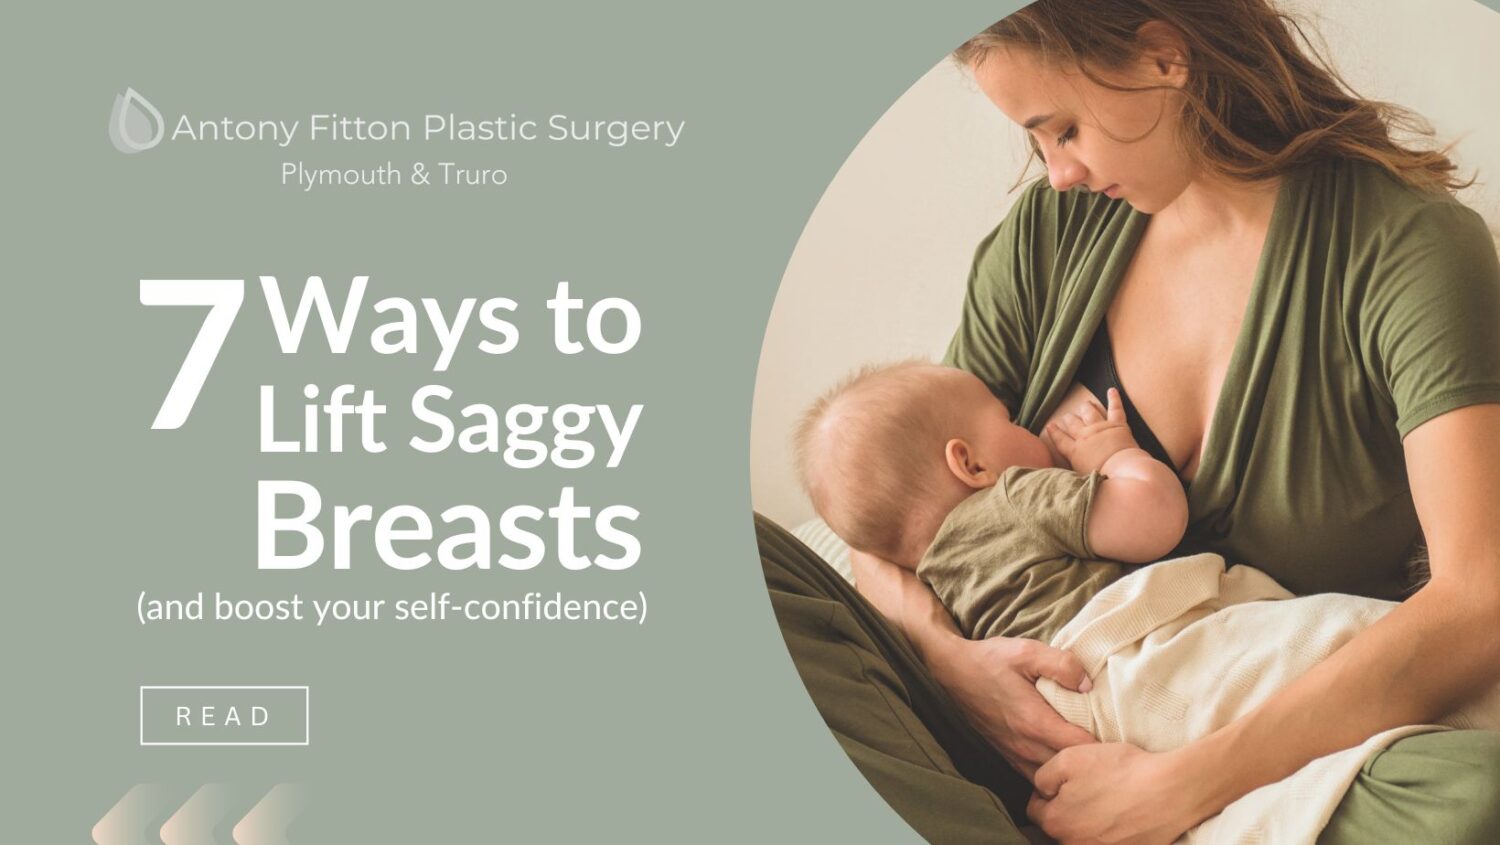 7 Ways to Lift Saggy Breasts (and Boost Your Self-confidence) | Antony Fitton Plastic Surgery | Plymouth & Truro